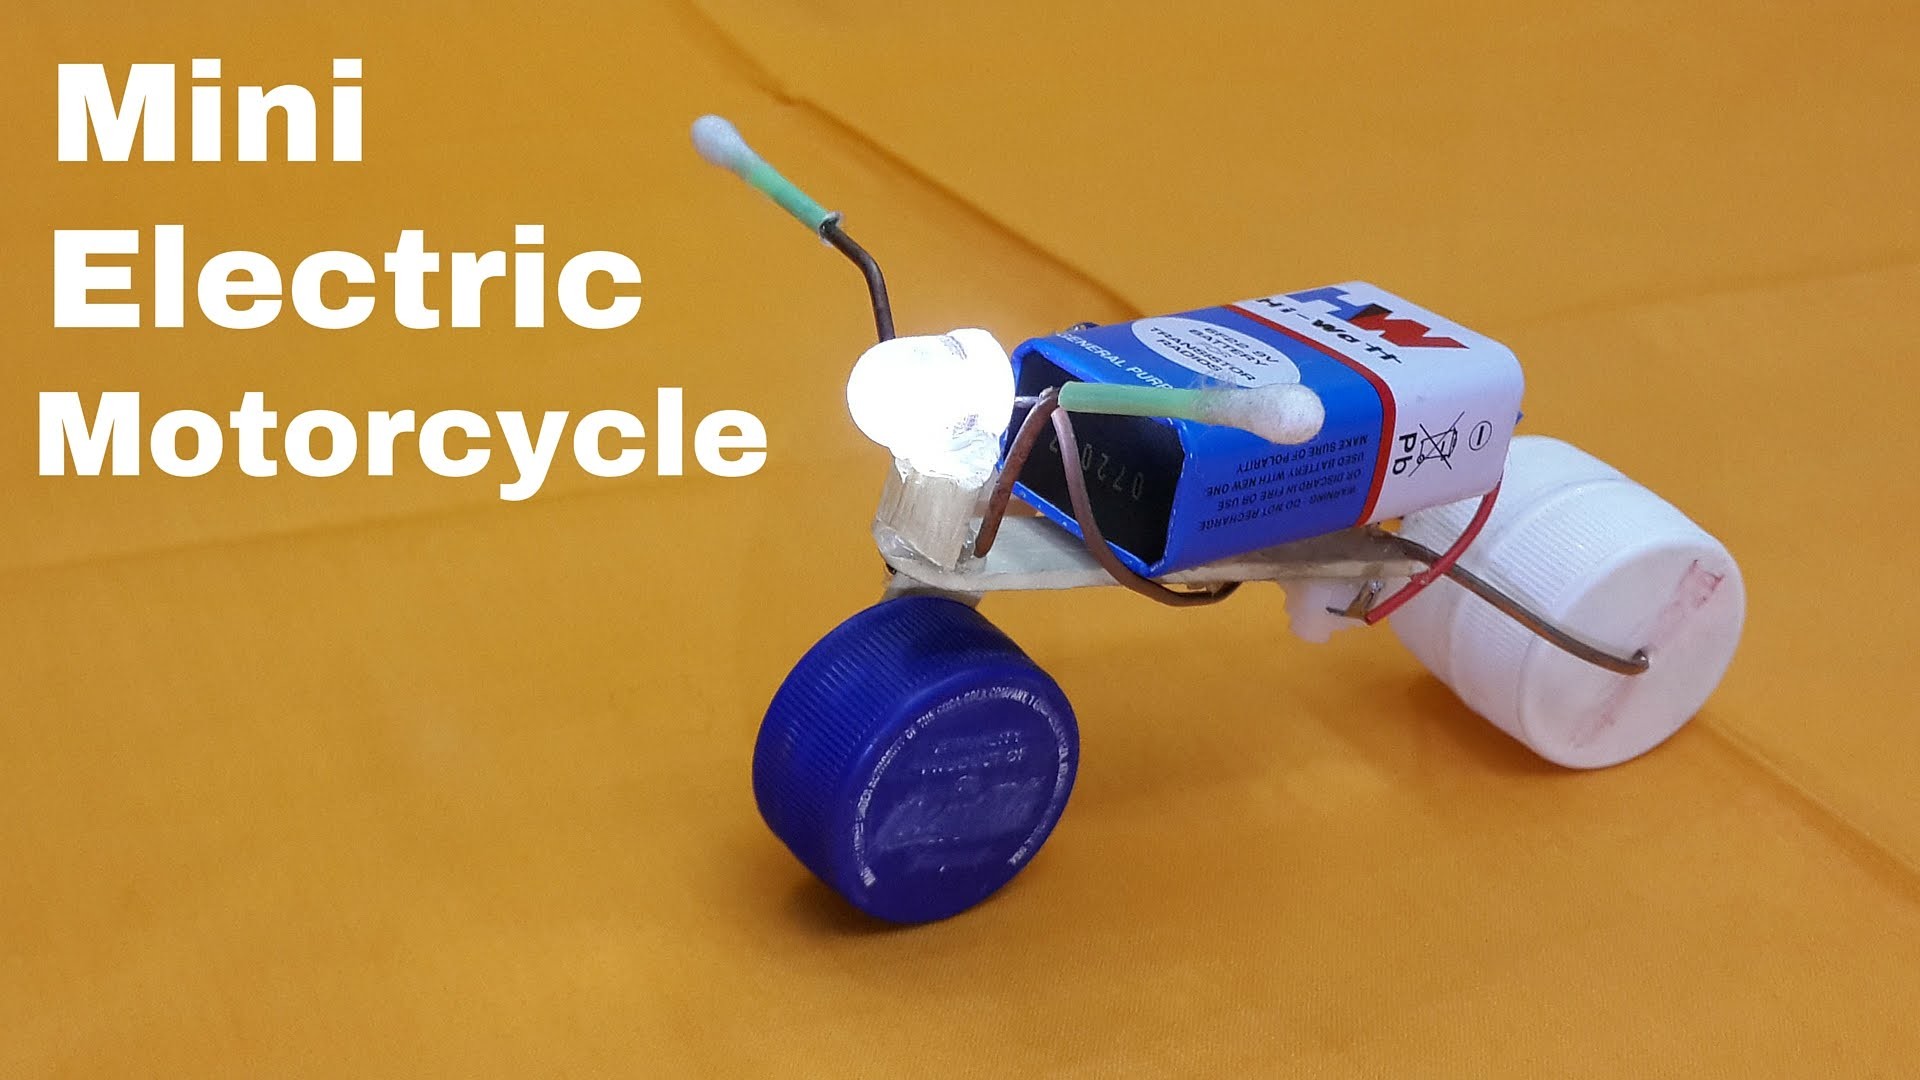 How to Make a Mini Electric Motorcycle with LED Headlight